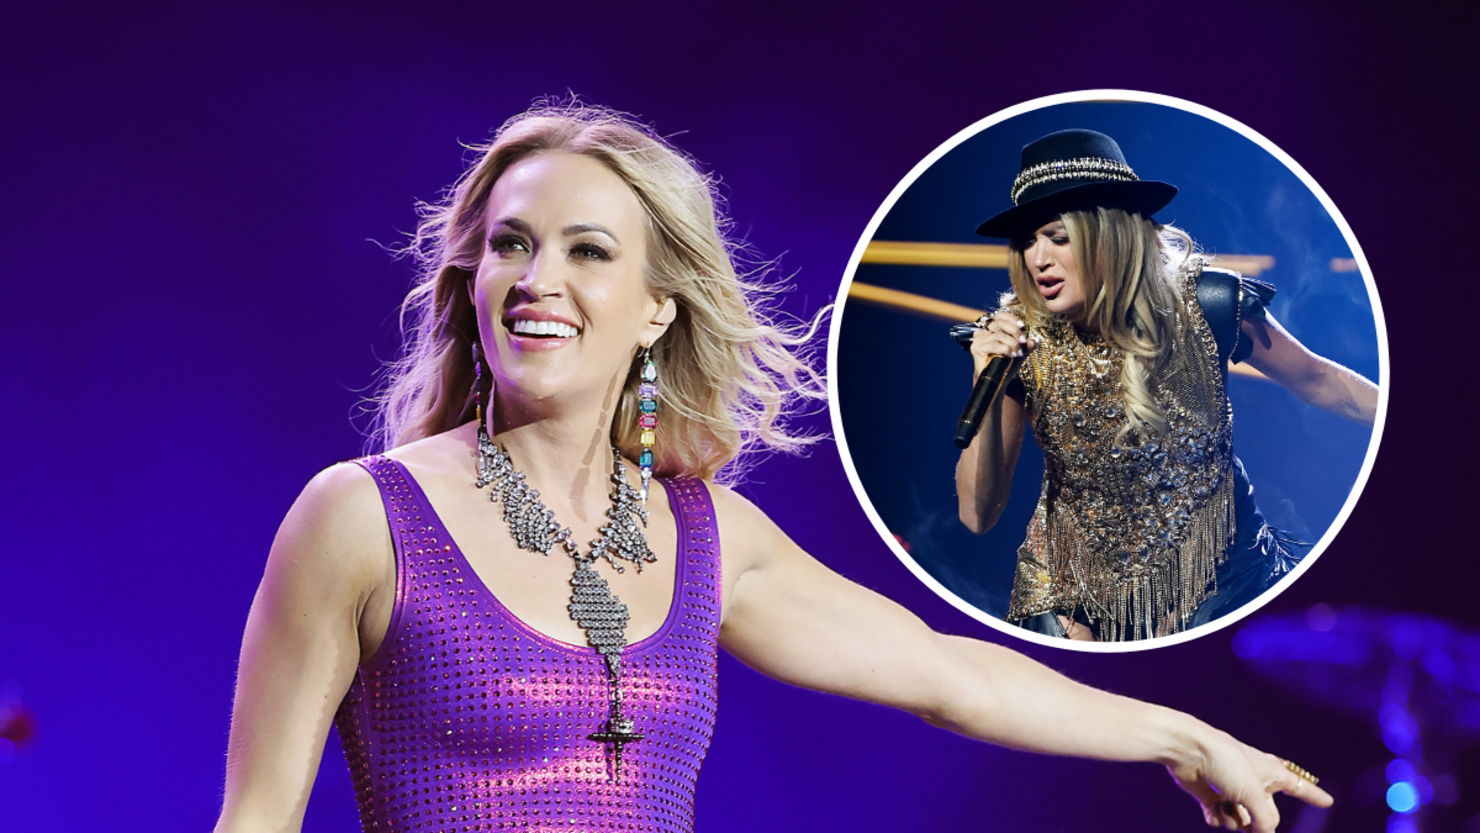 Carrie Underwood adds new shows to Las Vegas residency - Good